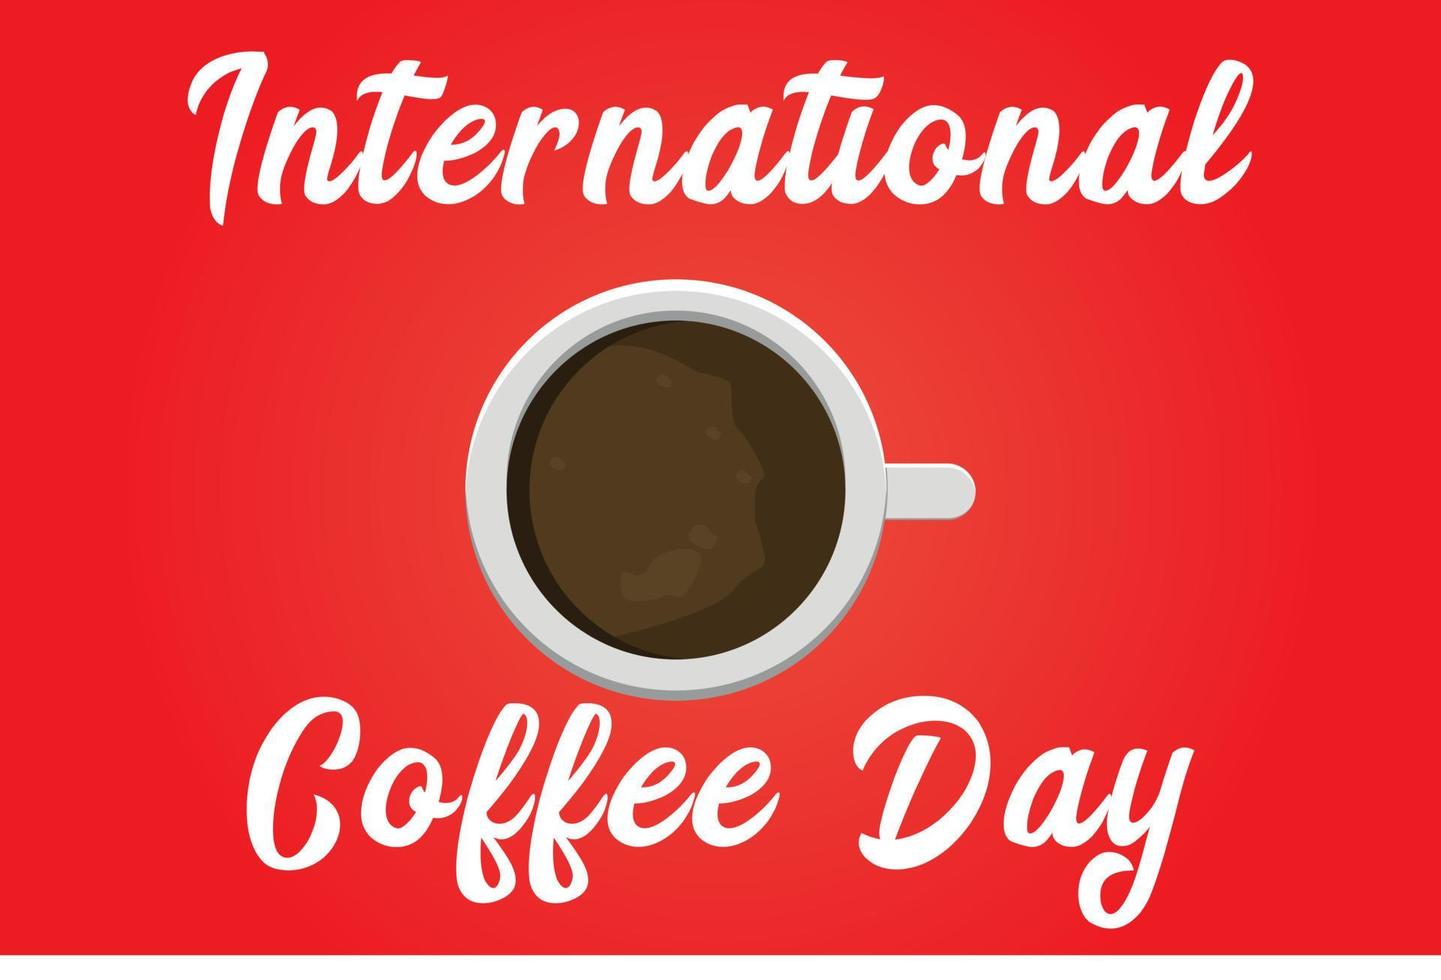 Flat Design Illustration Of International Coffee Day Templates, Design Suitable For Posters, Backgrounds, Greeting Cards, International Coffee Day Themed vector